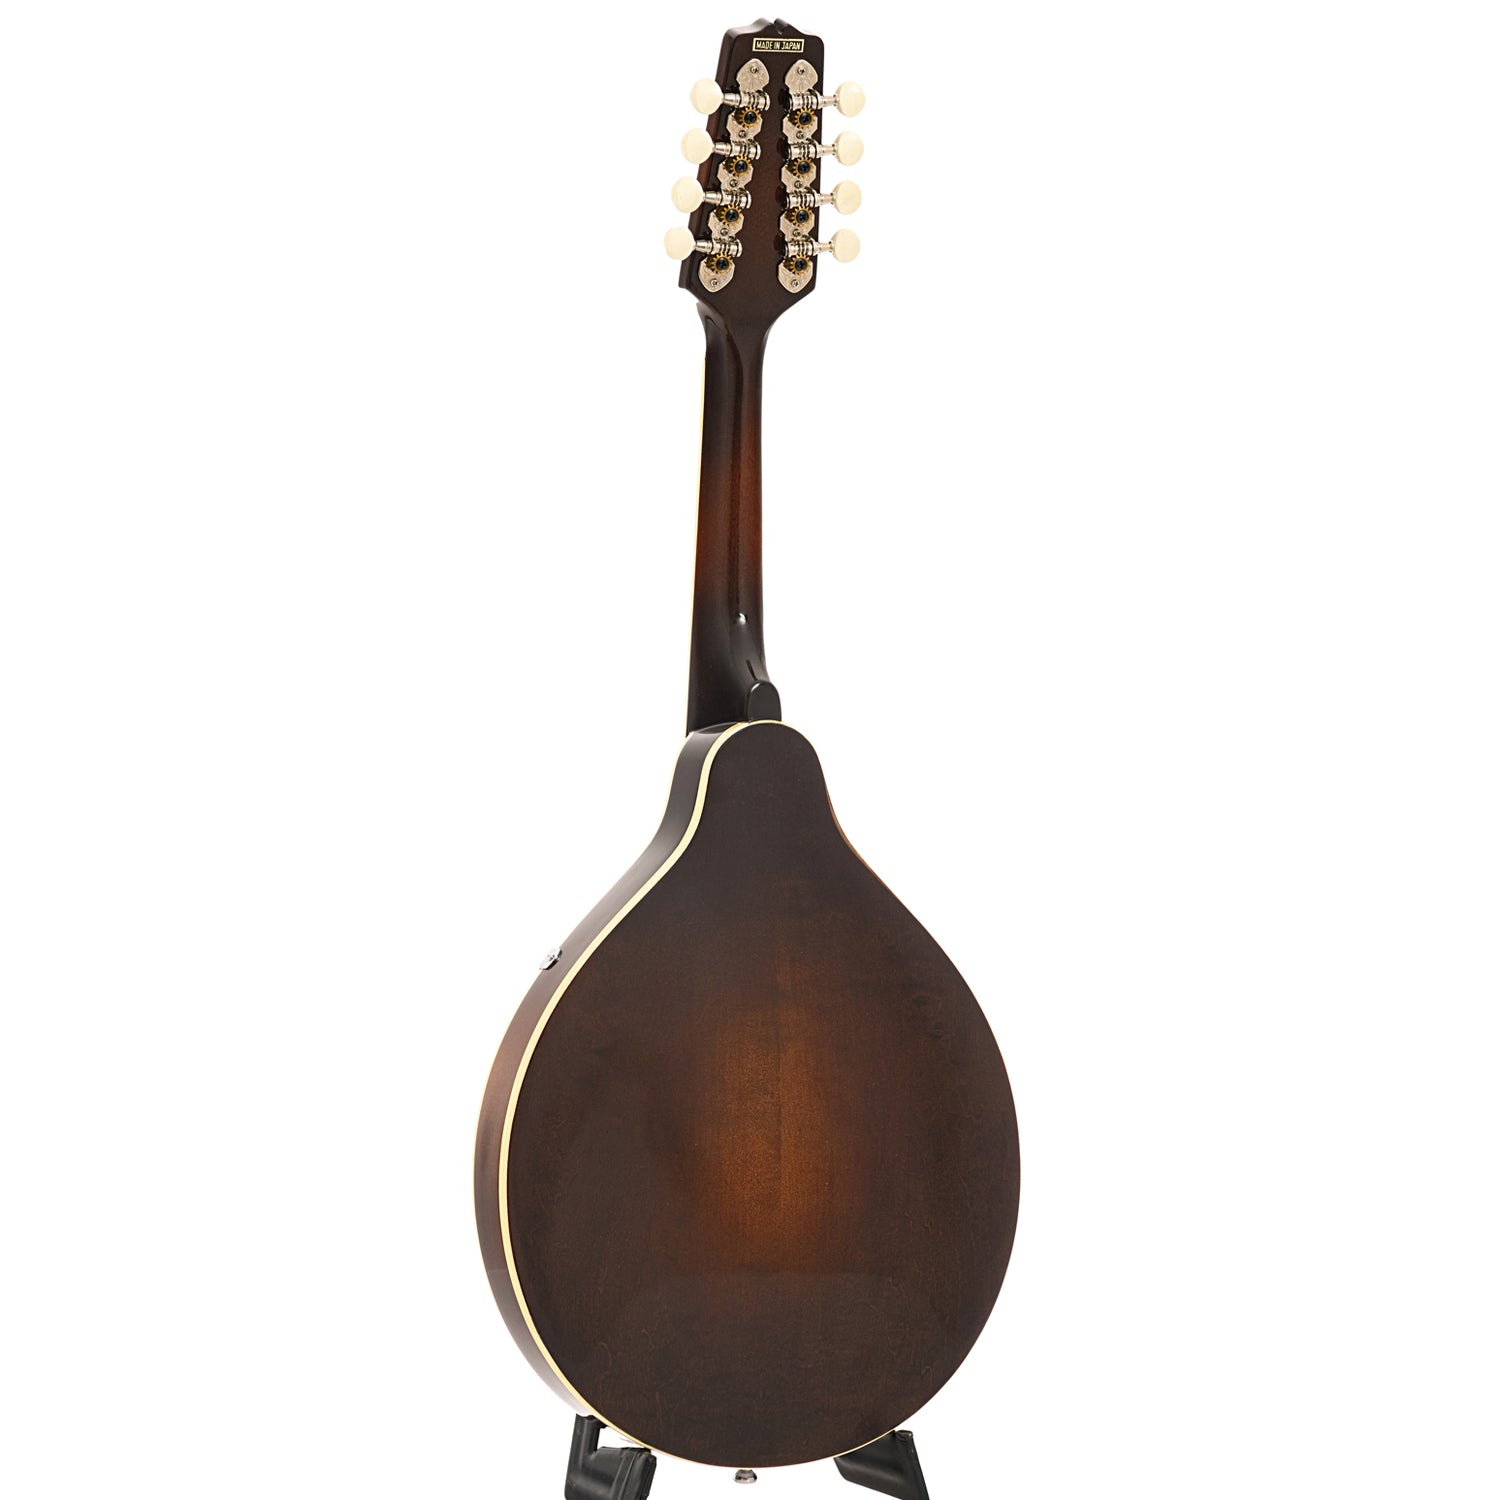 Full back and side of Kentucky KM250S mandolin